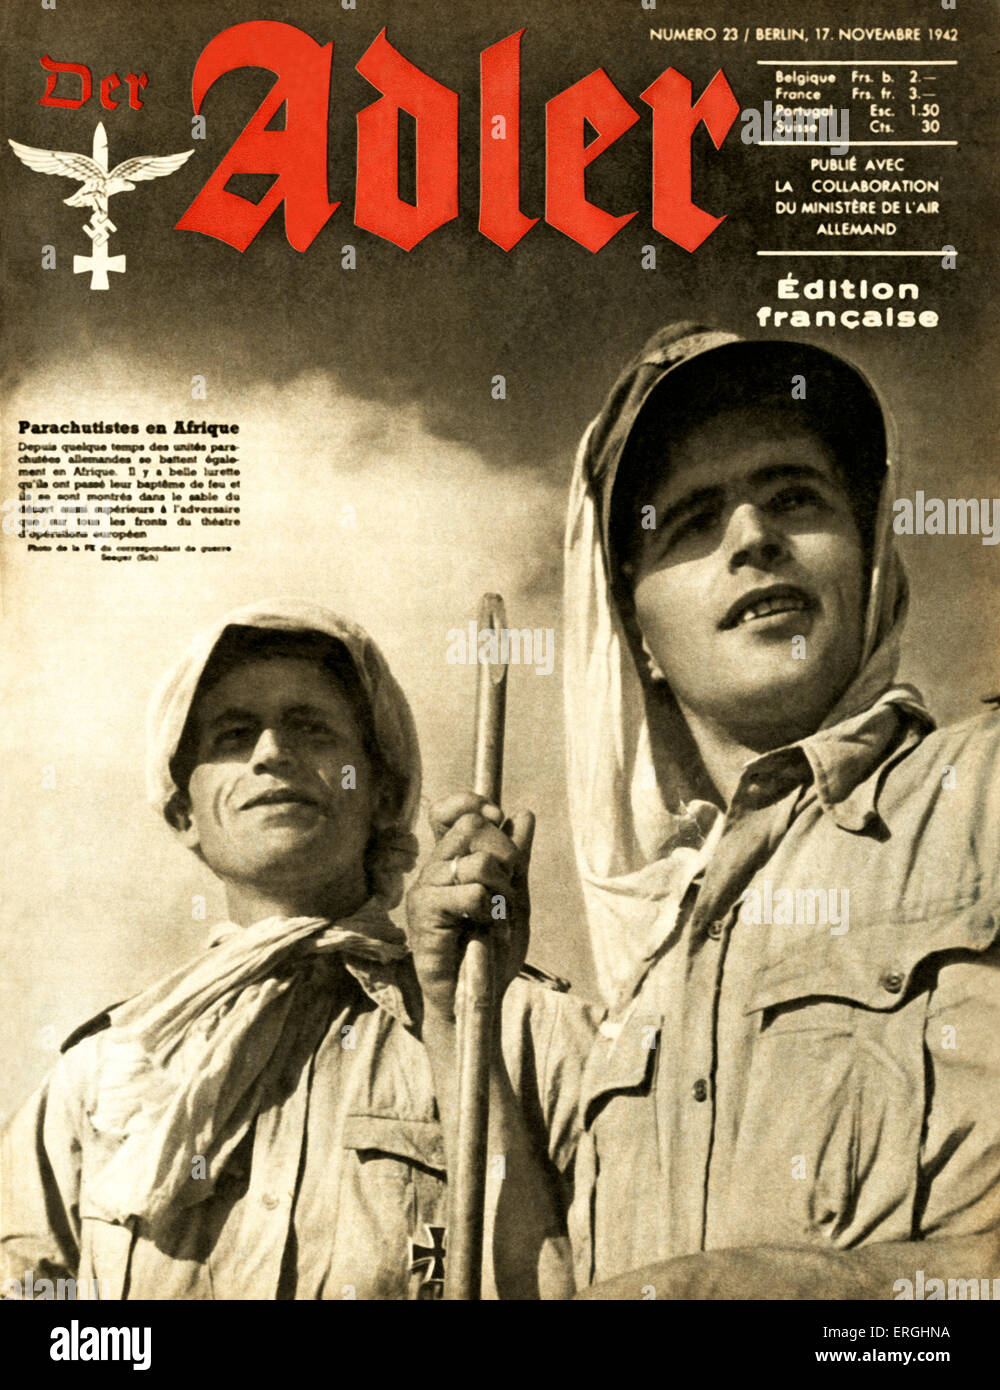 Der Adler, magazine of the German Air Force (Luftwaffe) during World War 2.  Cover of 17 November 1942. French edition. German Stock Photo